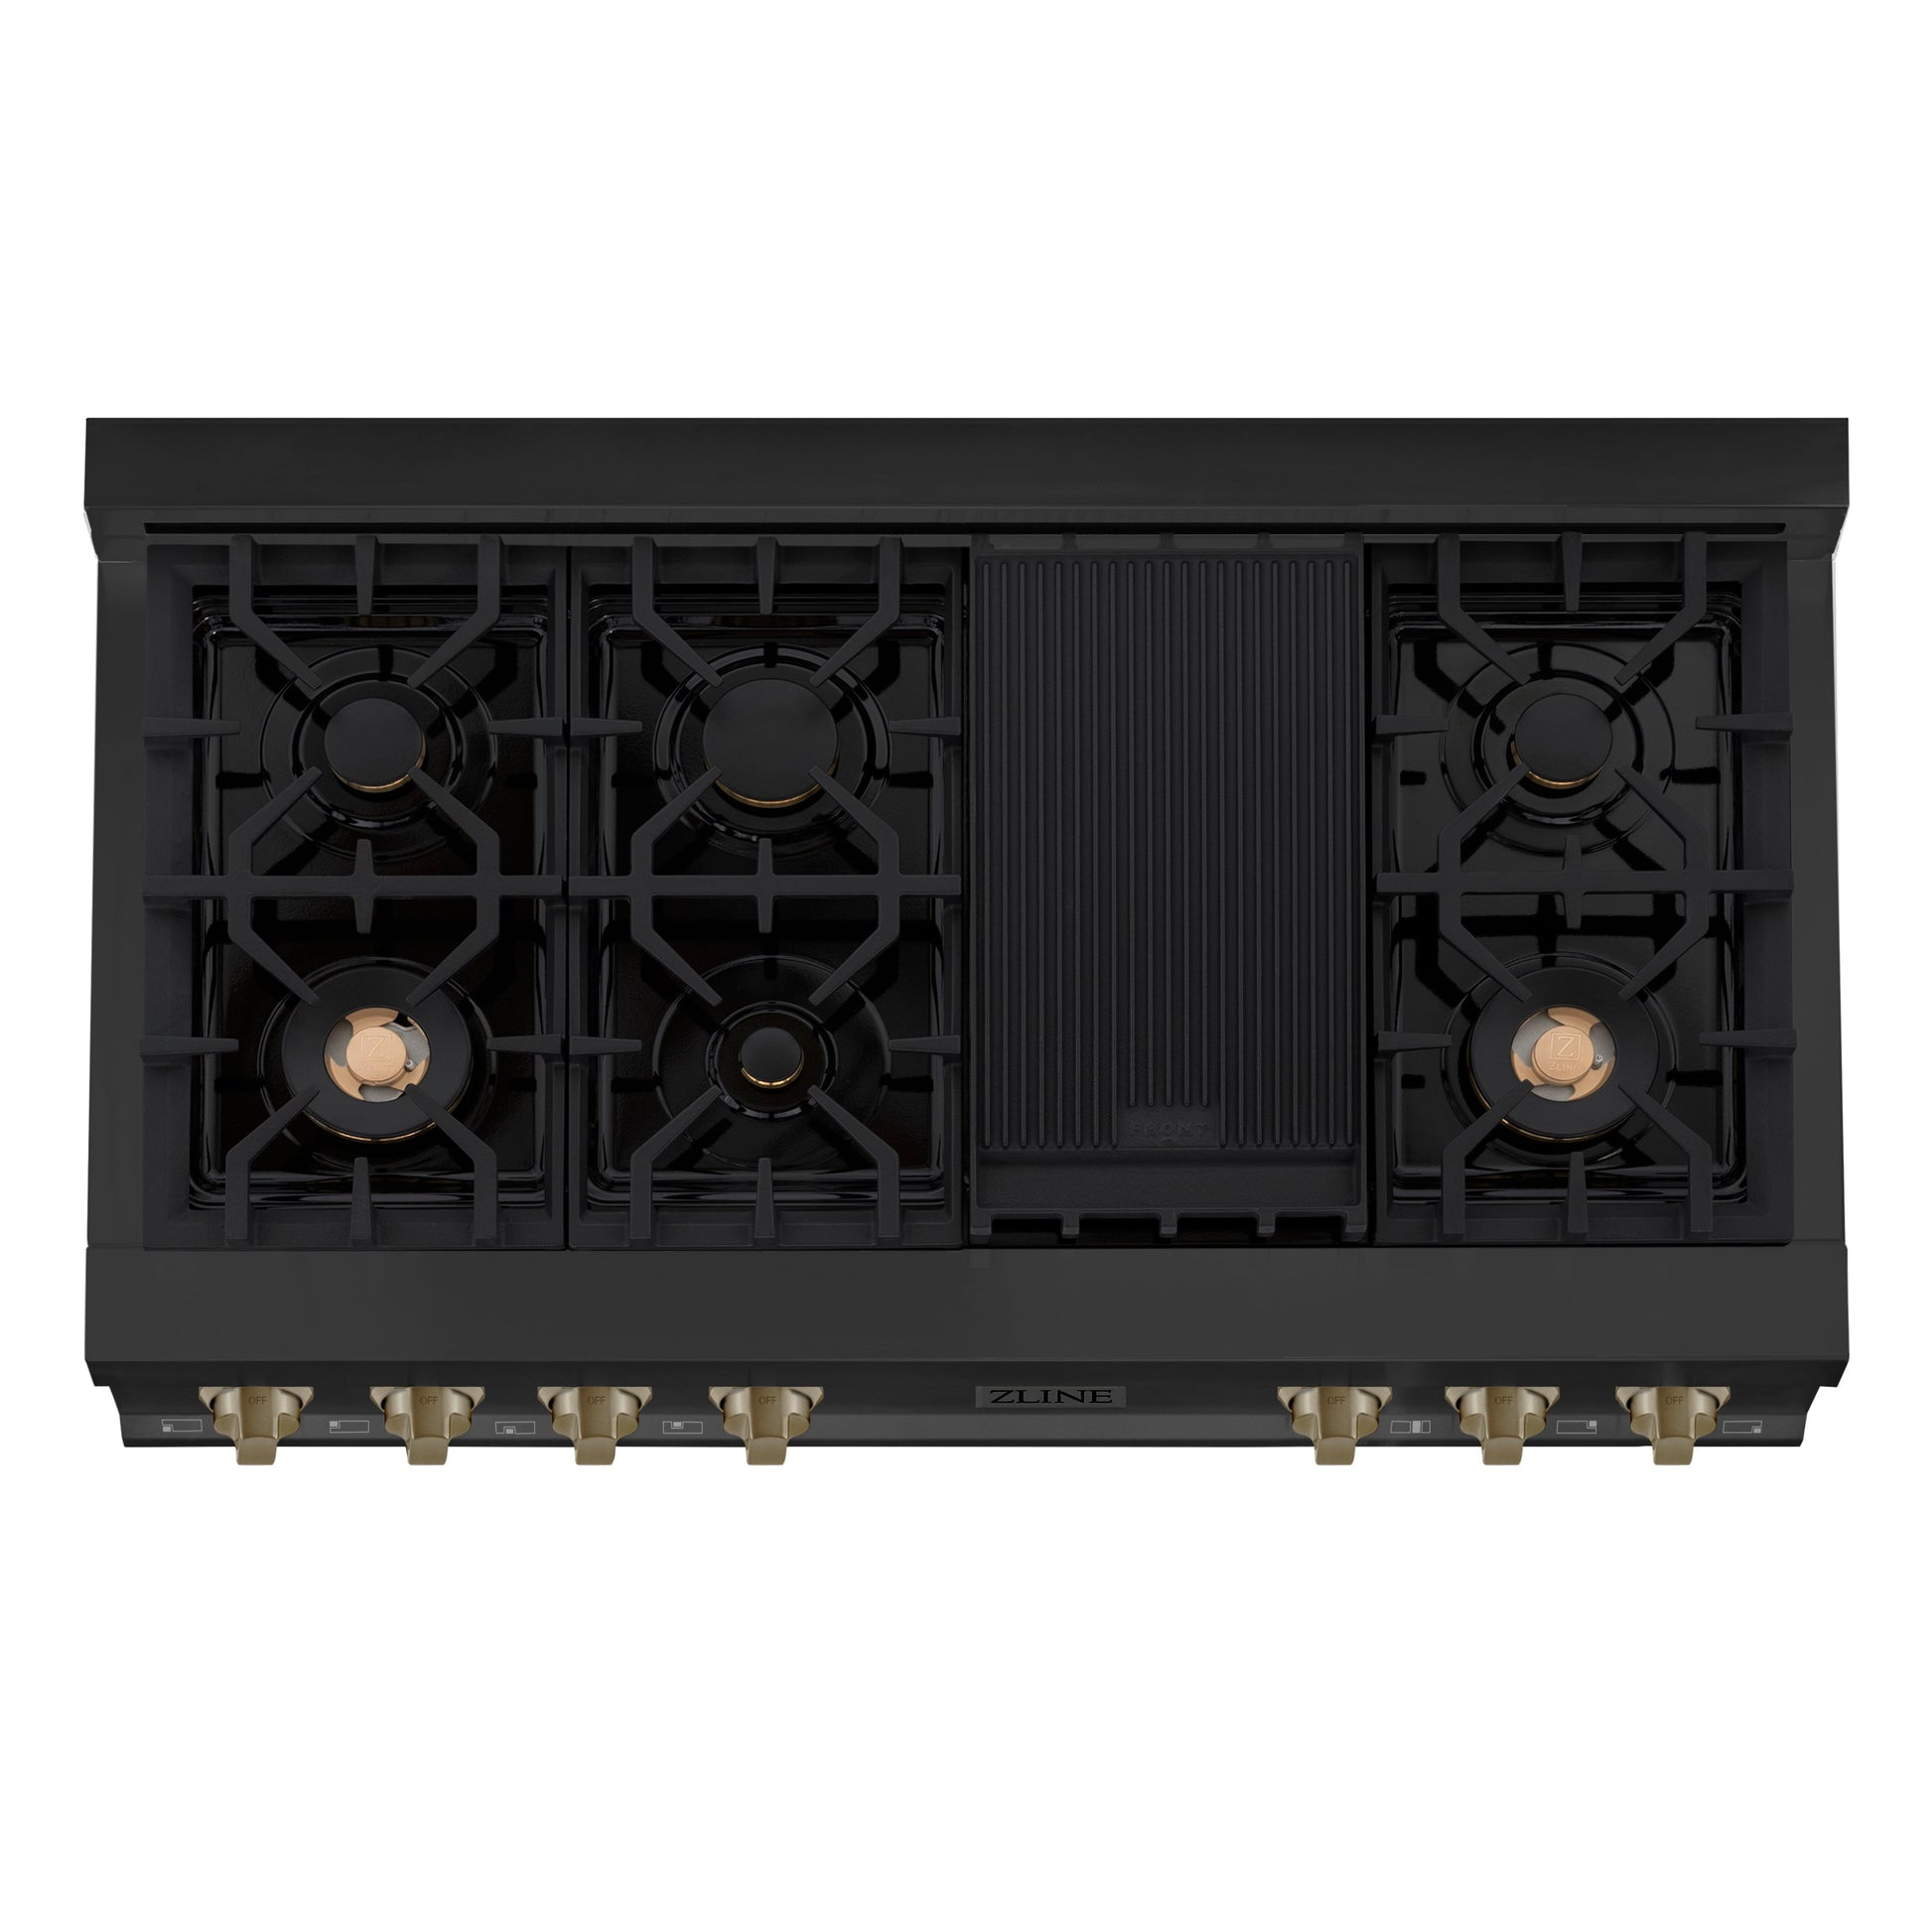 ZLINE Autograph Edition 48" Porcelain 7 Burner Gas Rangetop - Black Stainless Steel with Accents